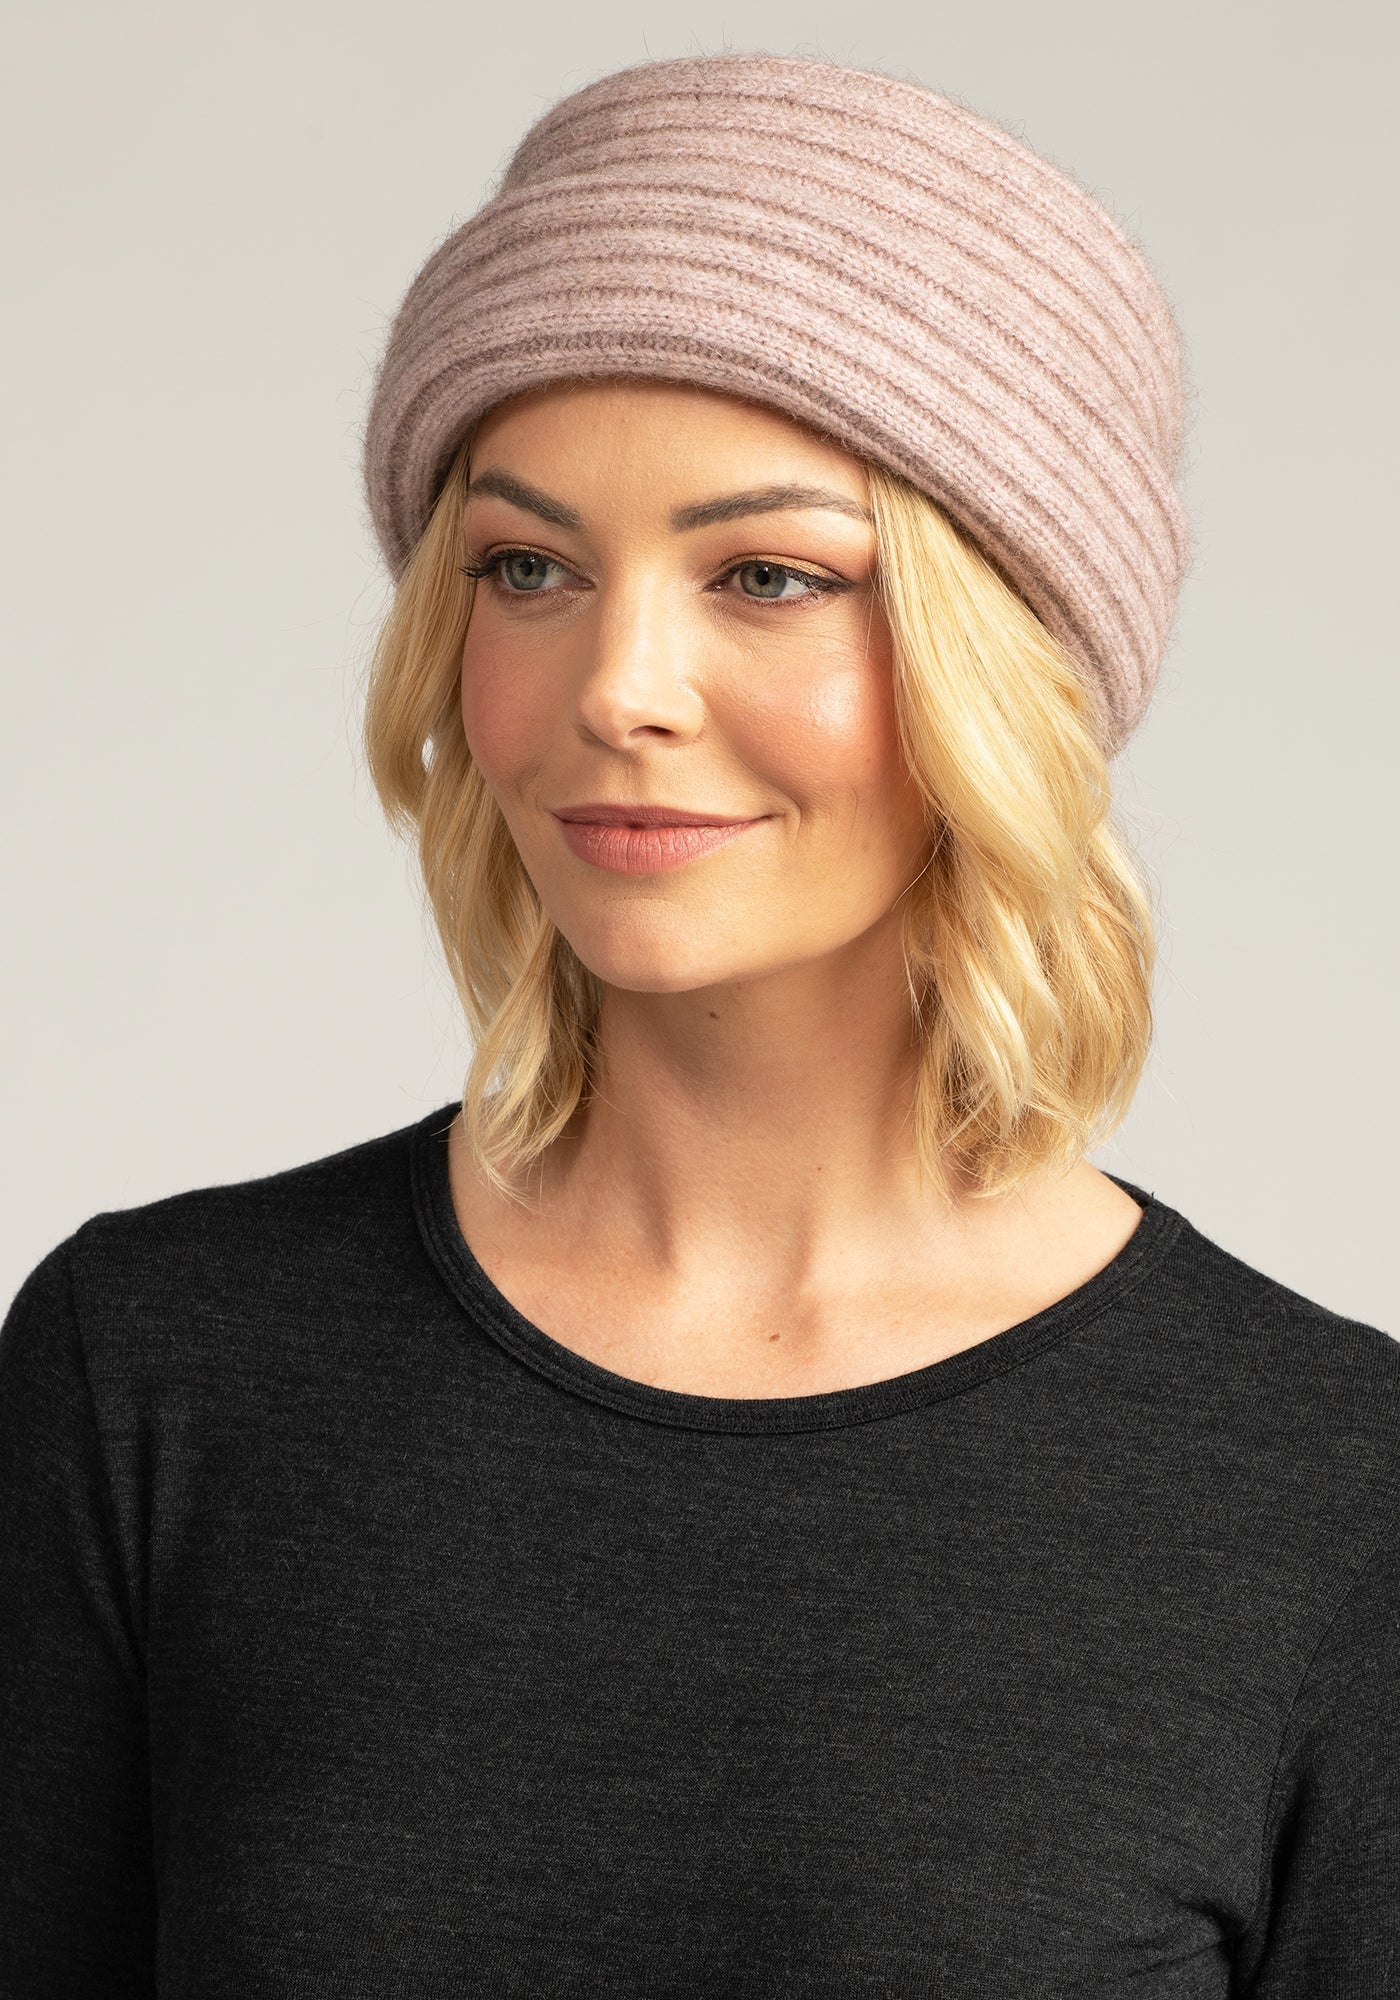 Elevate your winter look with our Merino Knit Beanie in light pink. Luxurious warmth meets chic style. Order yours today!